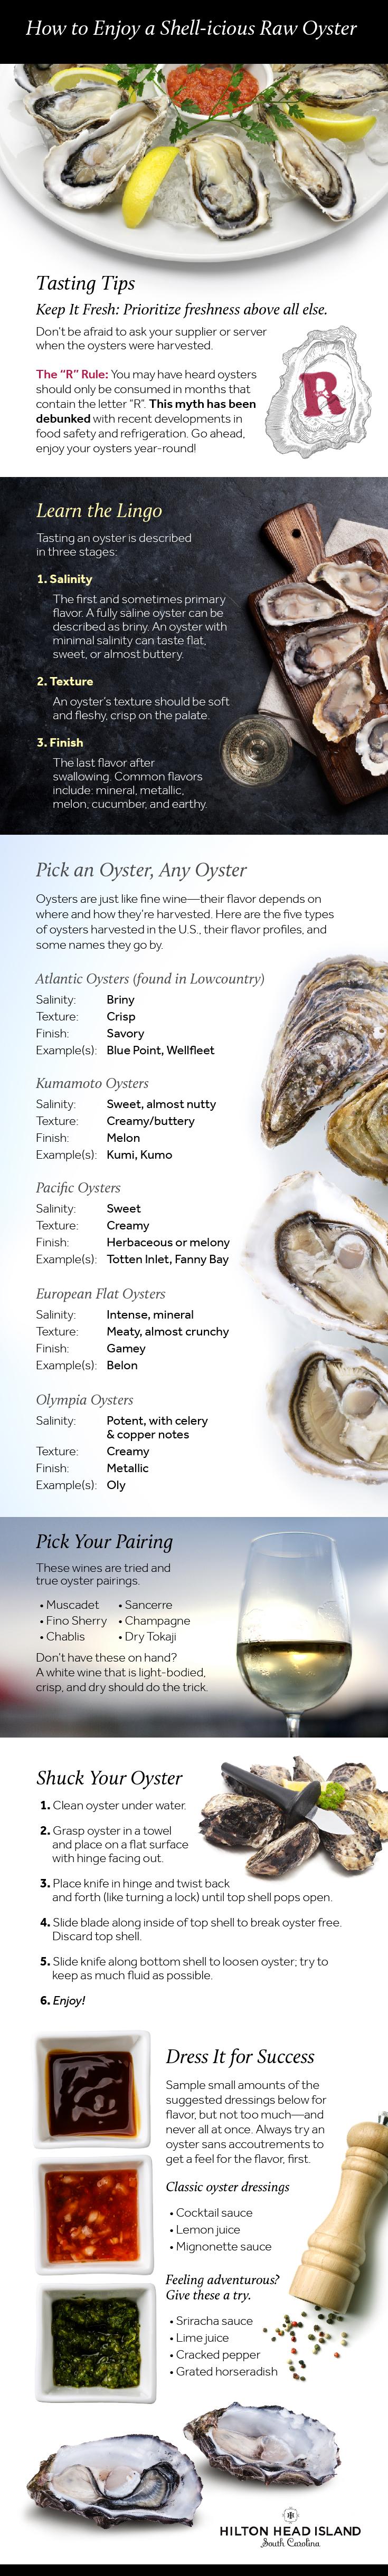 How to Enjoy a Shell-Icious Raw Oyster